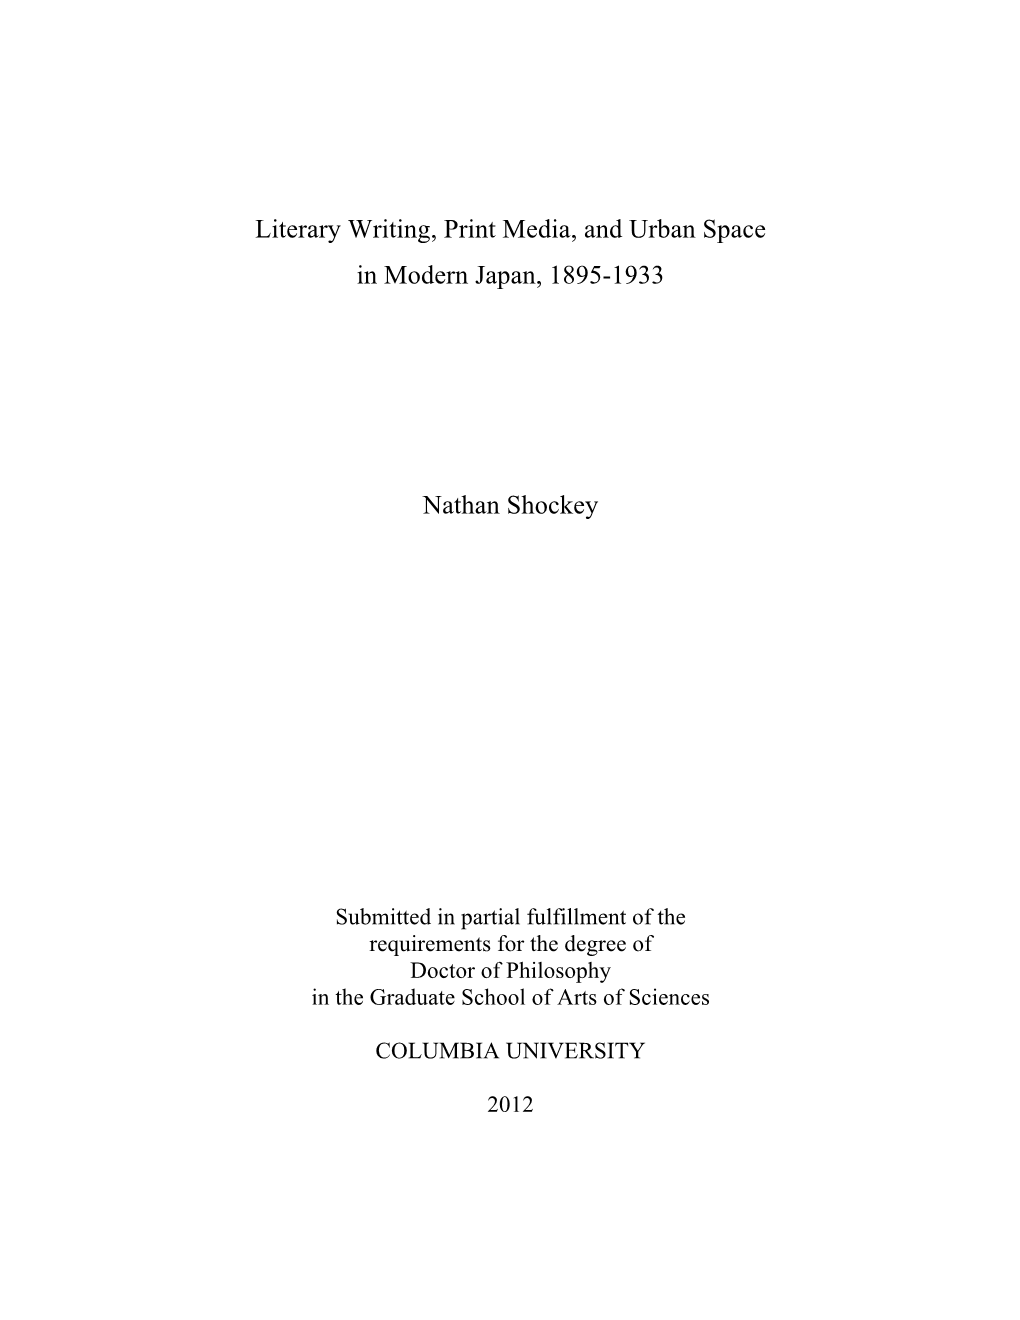 Literary Writing, Print Media, and Urban Space in Modern Japan, 1895-1933